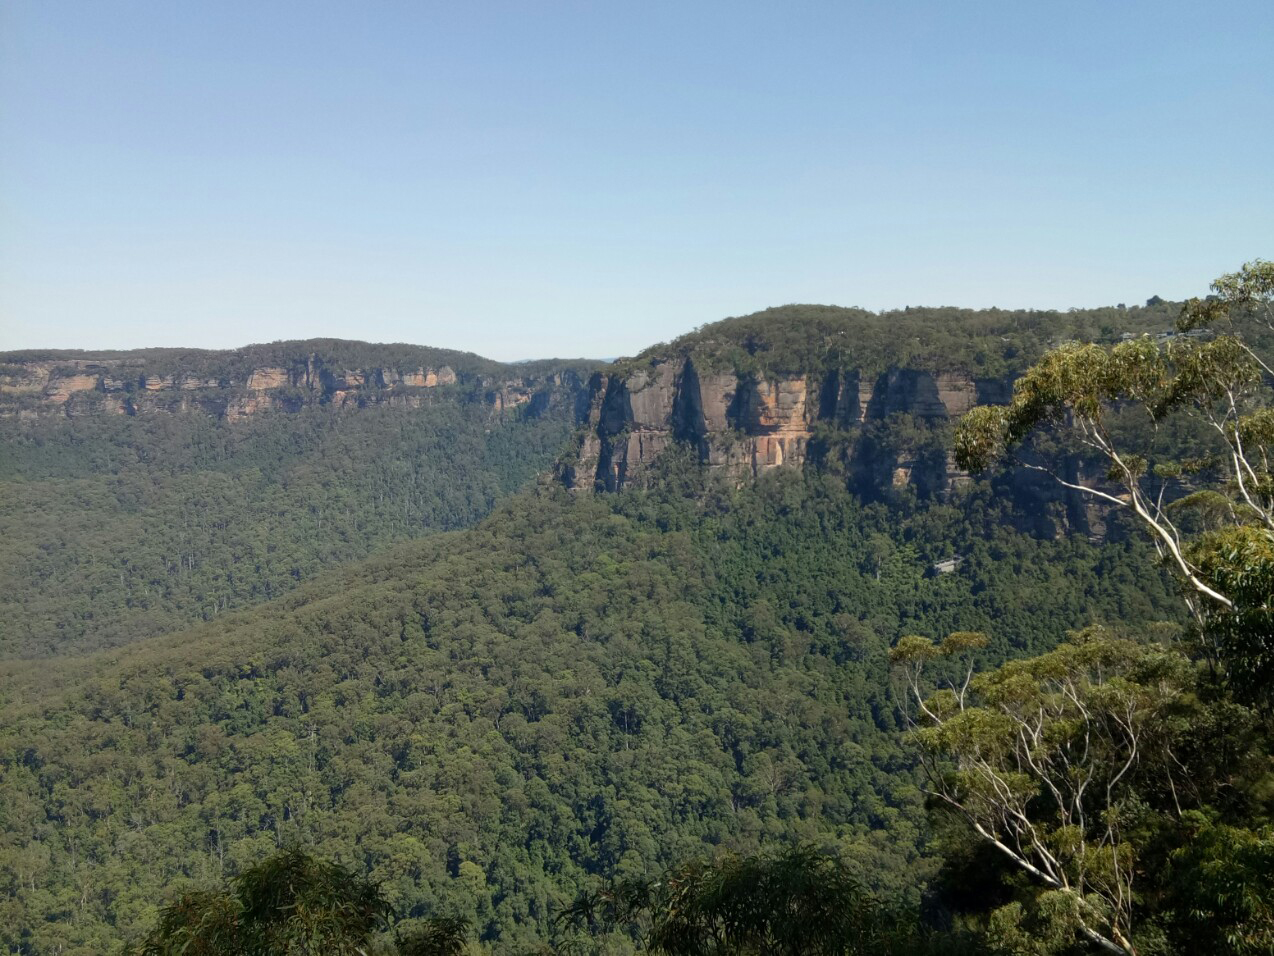 Image of the Blue Mountains